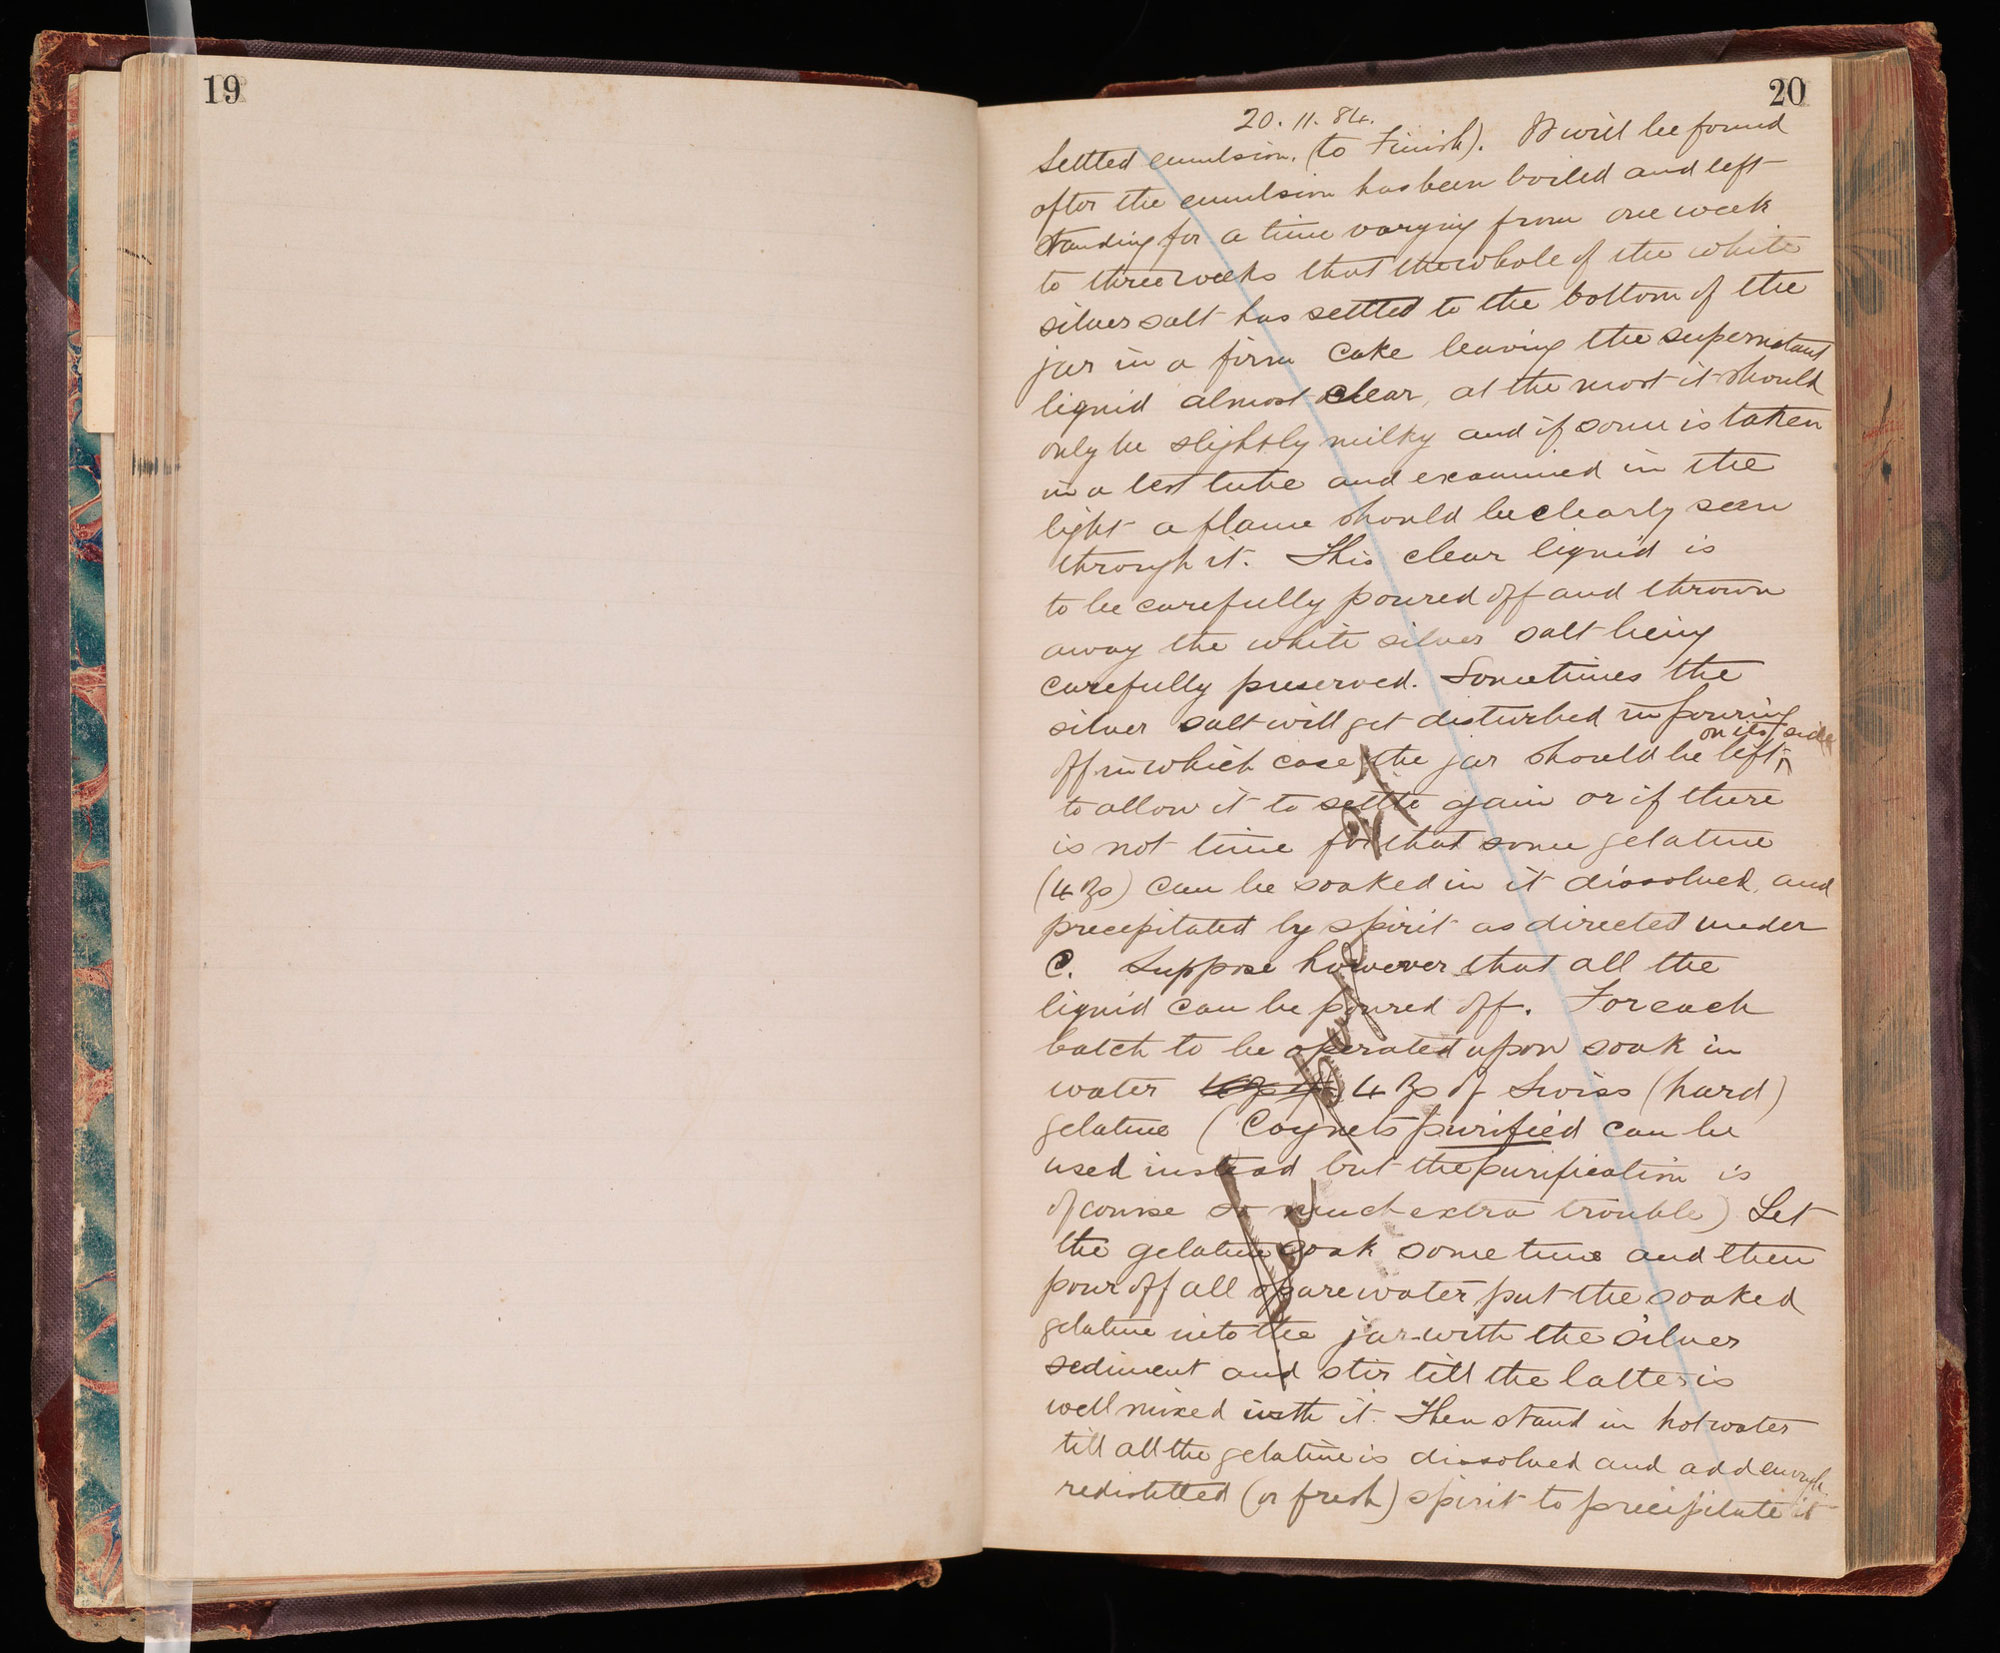 Pages of a hard cover notebook with handwritten notes on the left page 